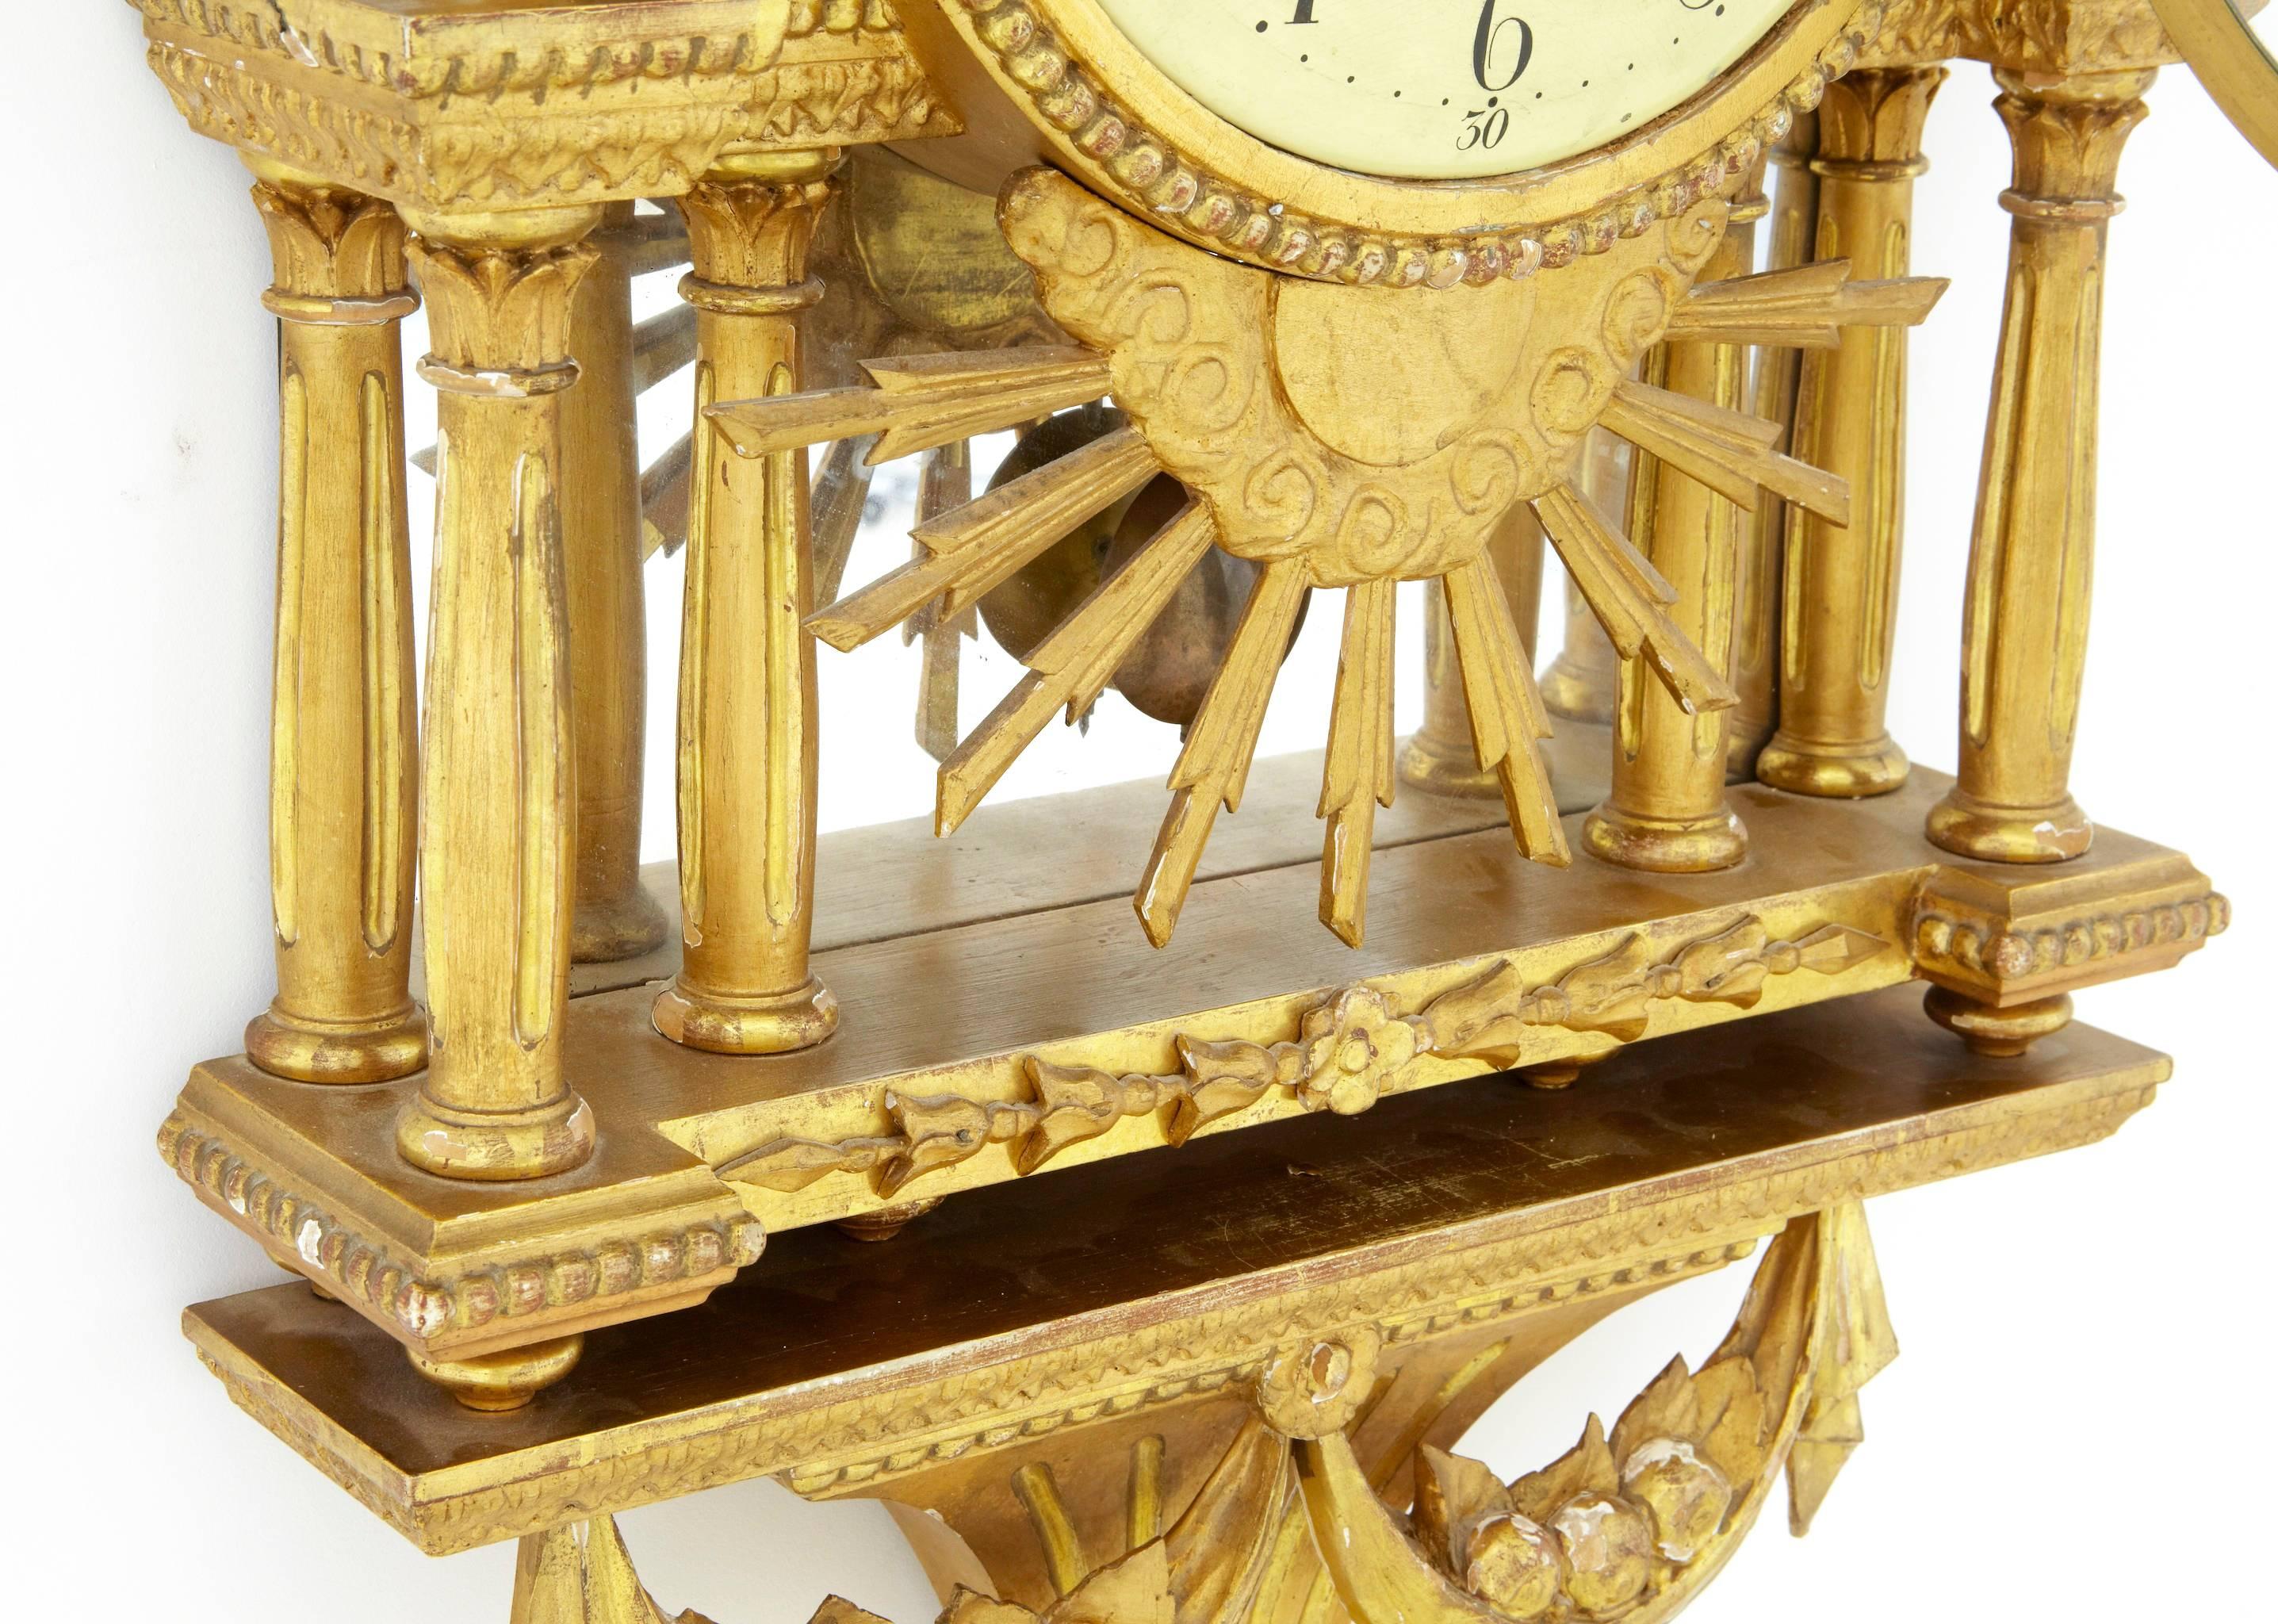 Woodwork Late 19th Century Swedish Gilt Wall Clock by Rob Engstrom, Stockholm